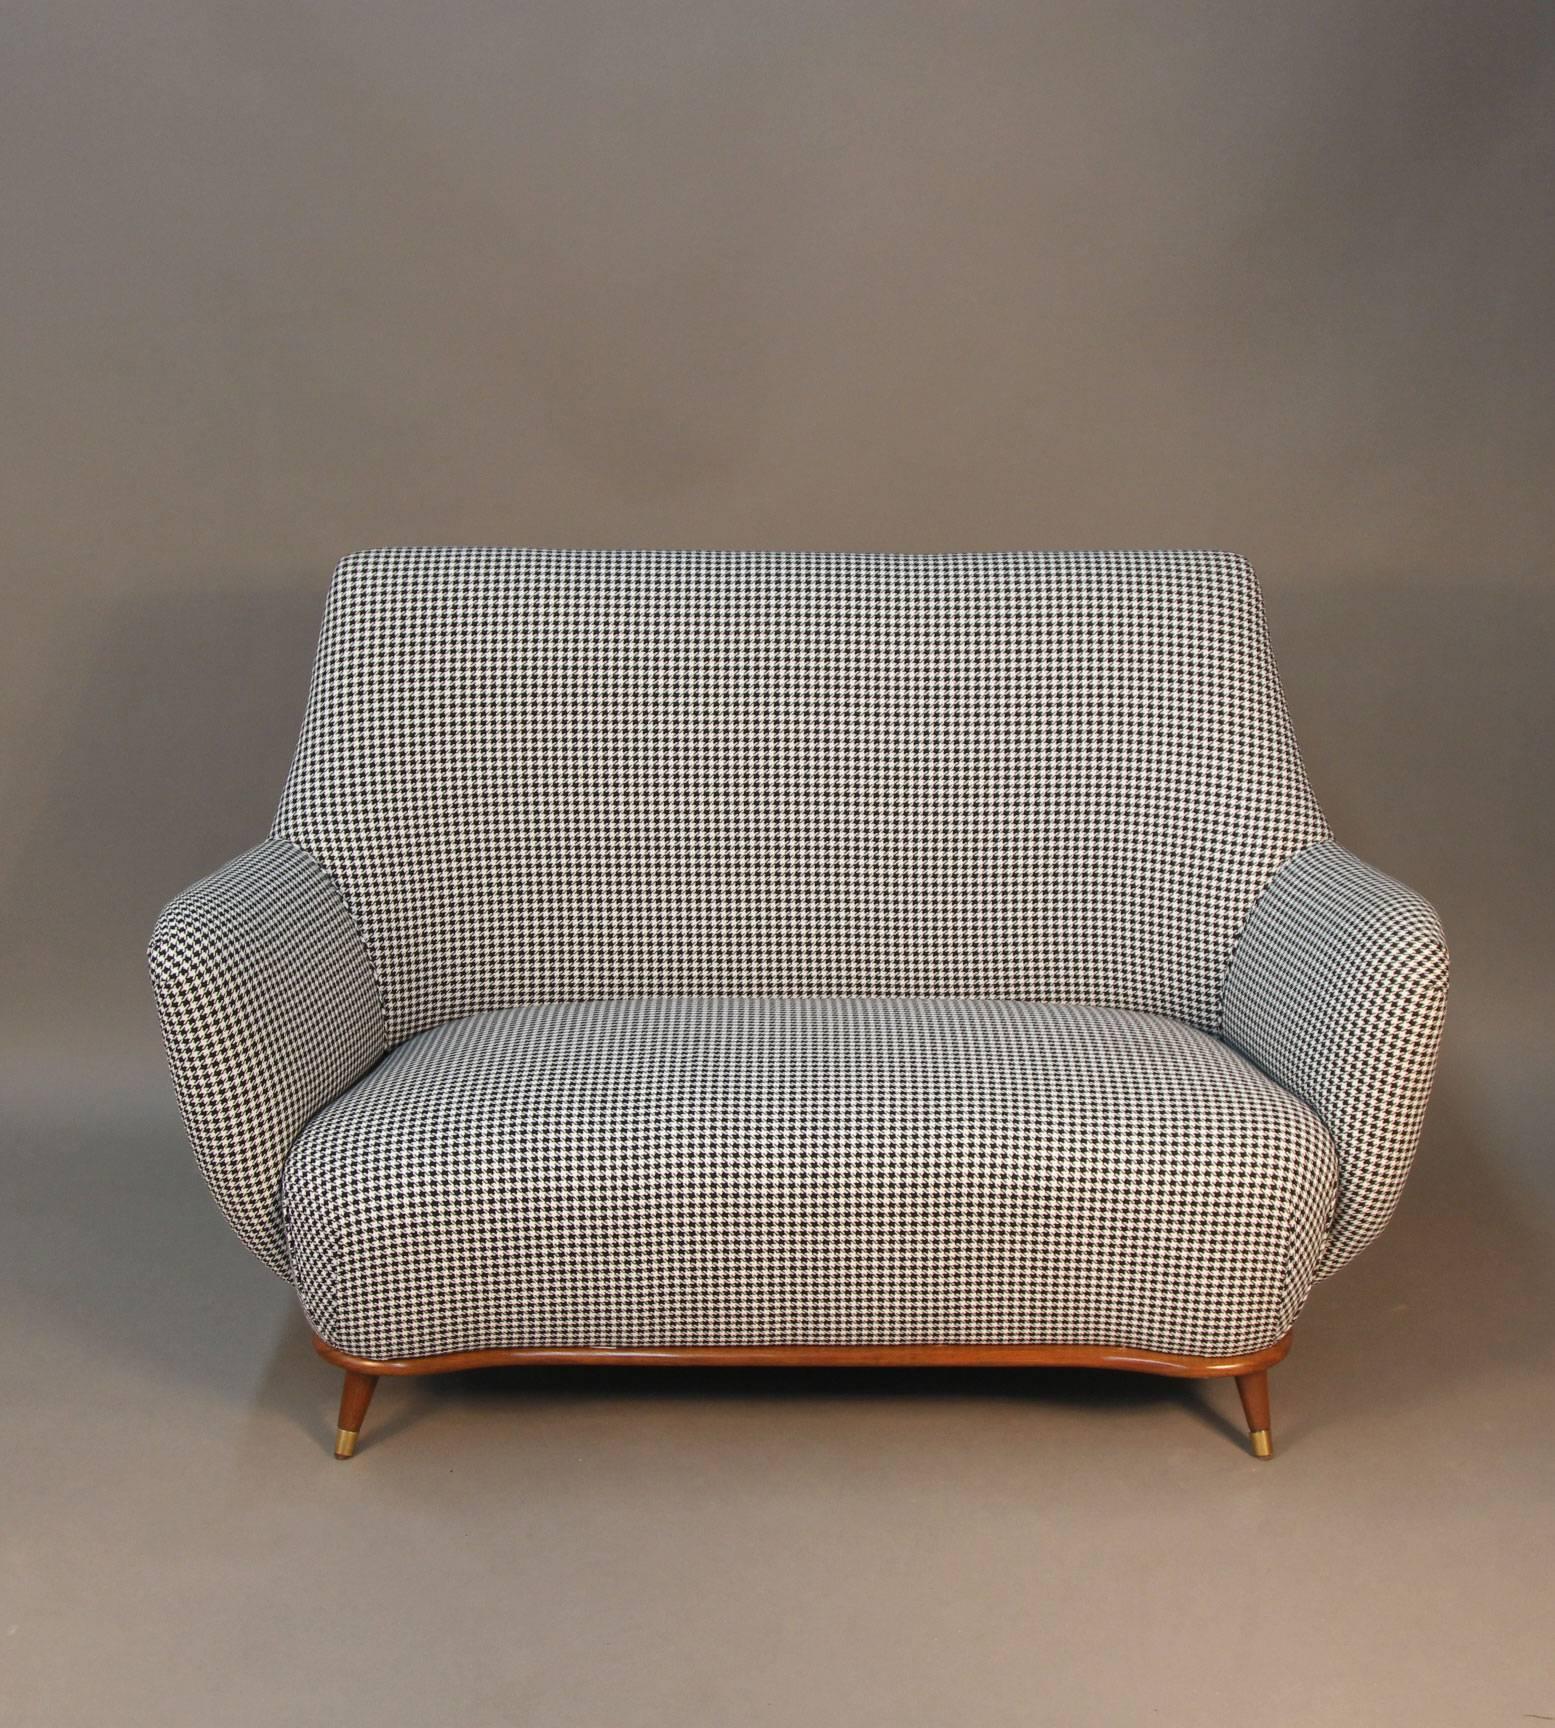 Mid-Century settee in the manner of Gio Ponti. Newly upholstered with houndstooth fabric in front, and black velvet pleated fabric in the back. Wood frame with new brass sabots.

Also available, matching armchairs.